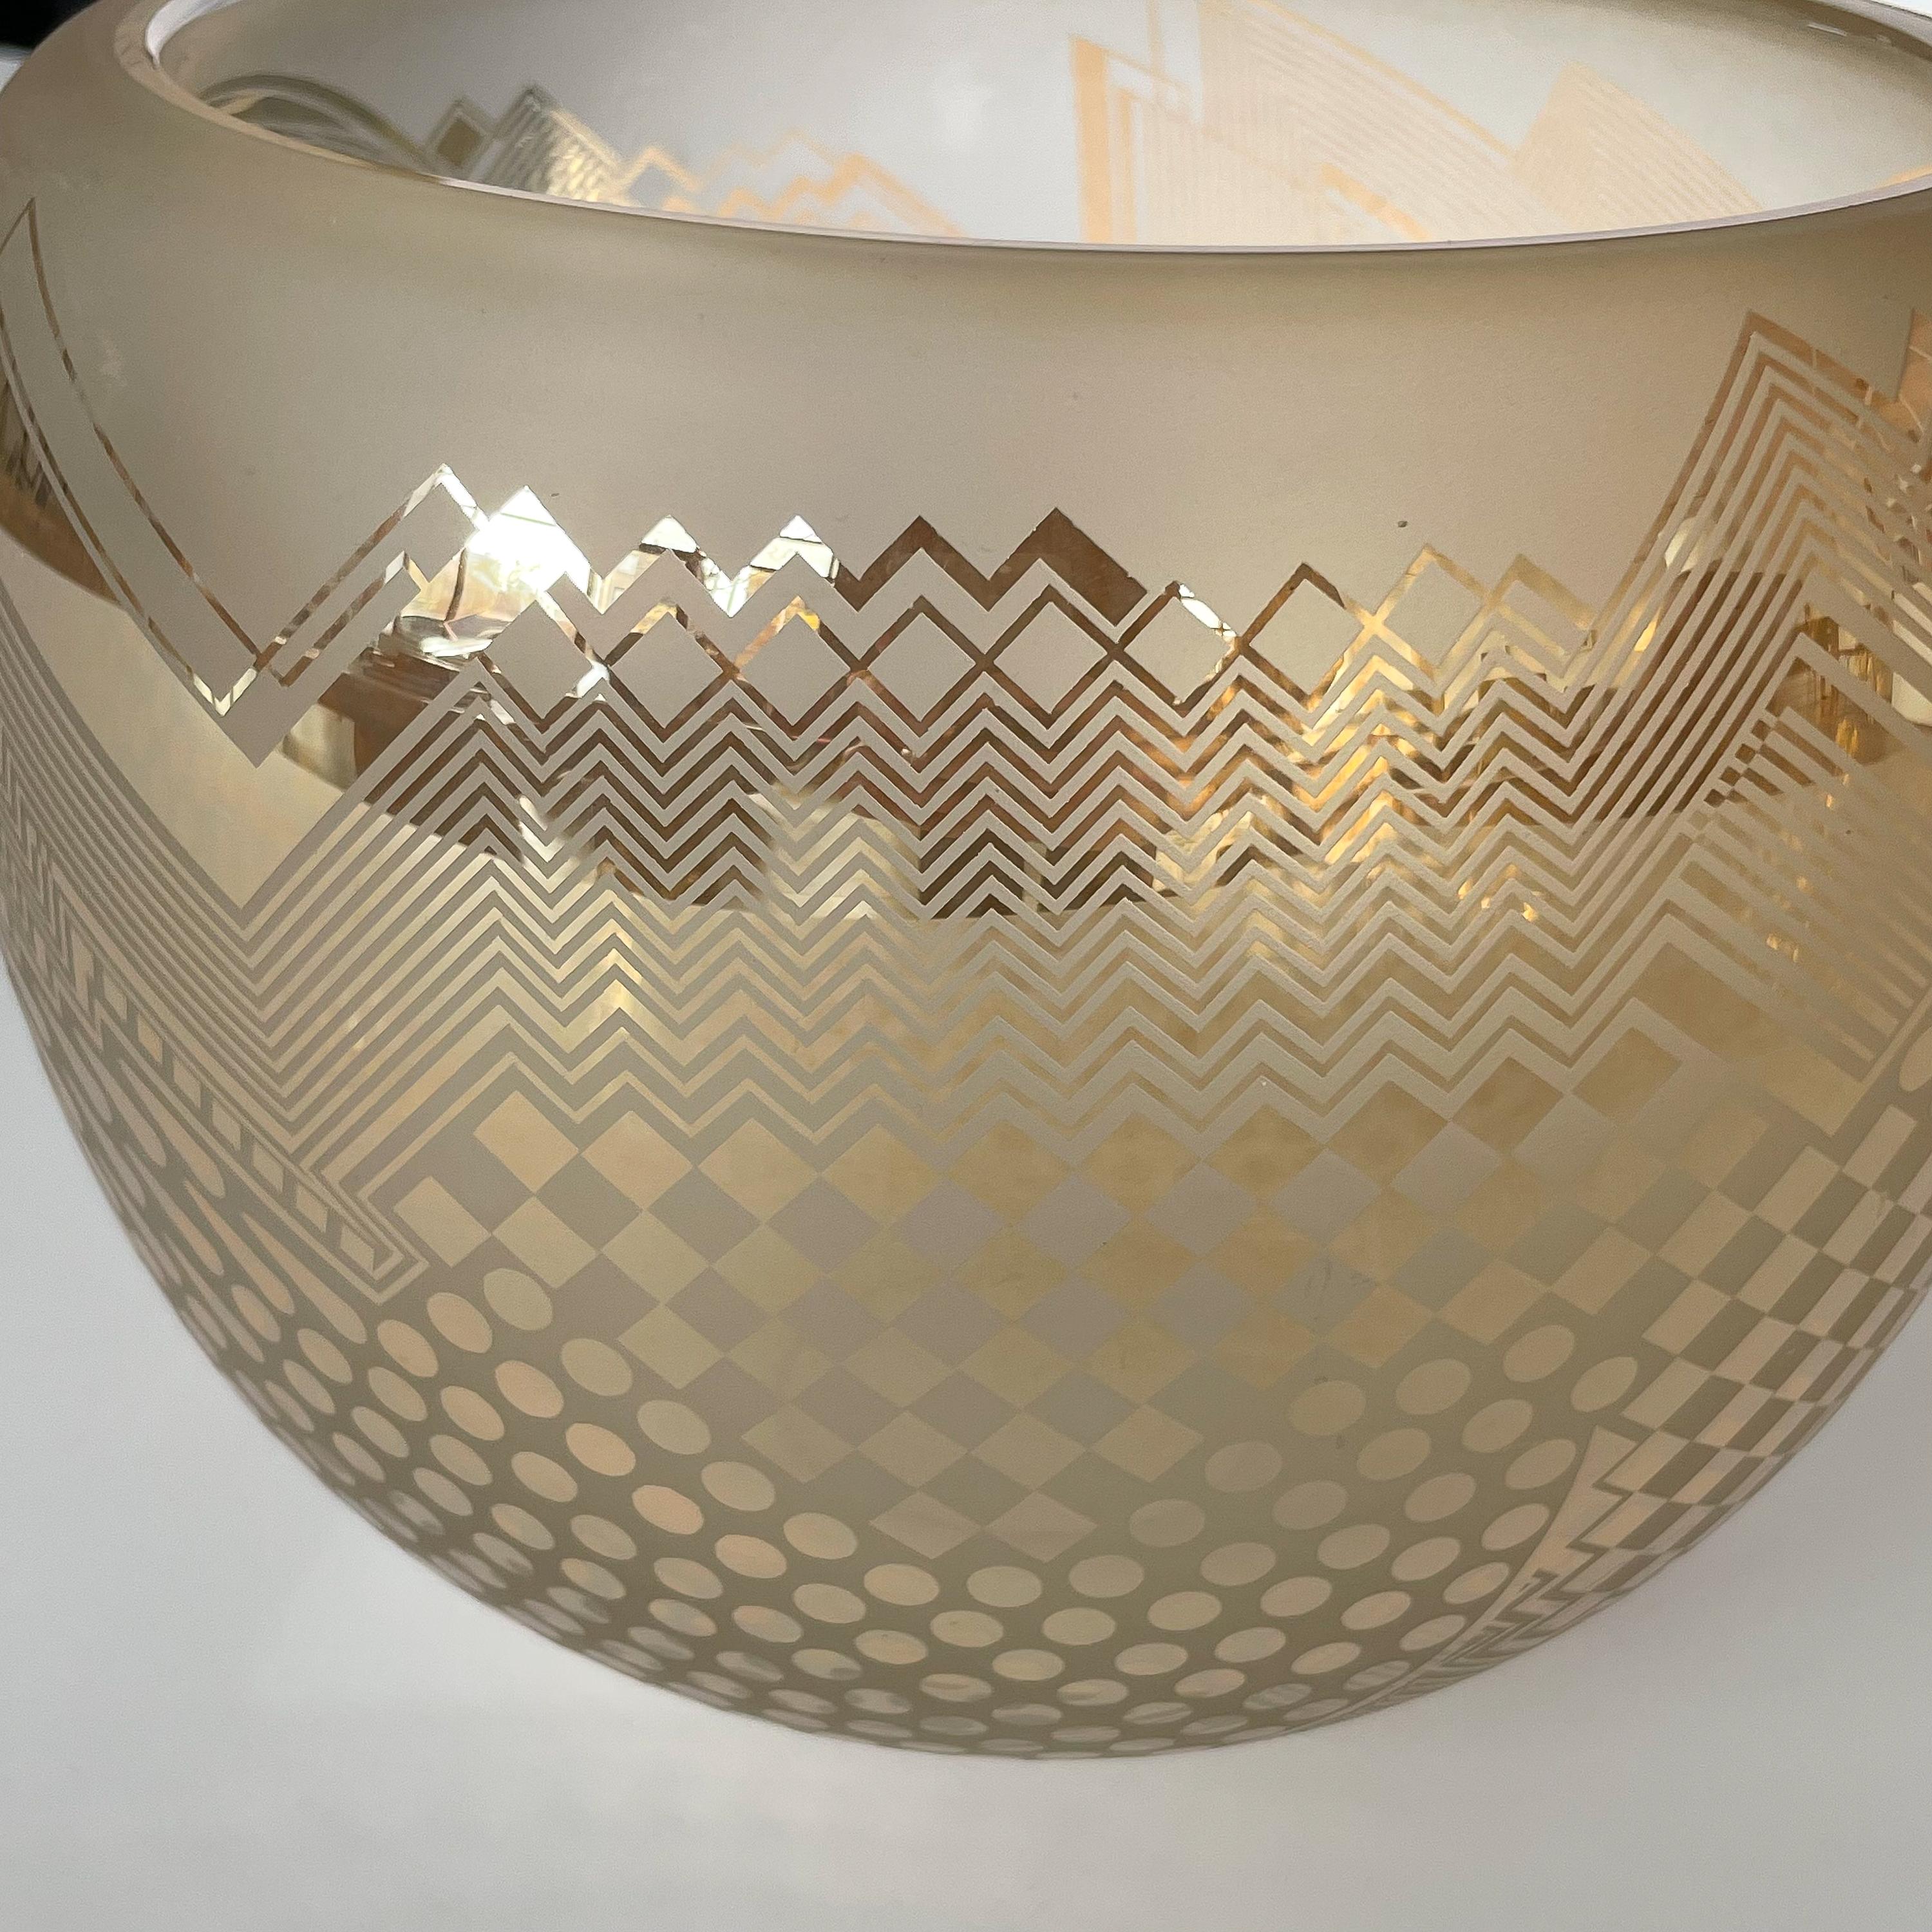 Michelle Schoen / Bob Toensing Frosted and Gold Mirrored Glass Bowl 3